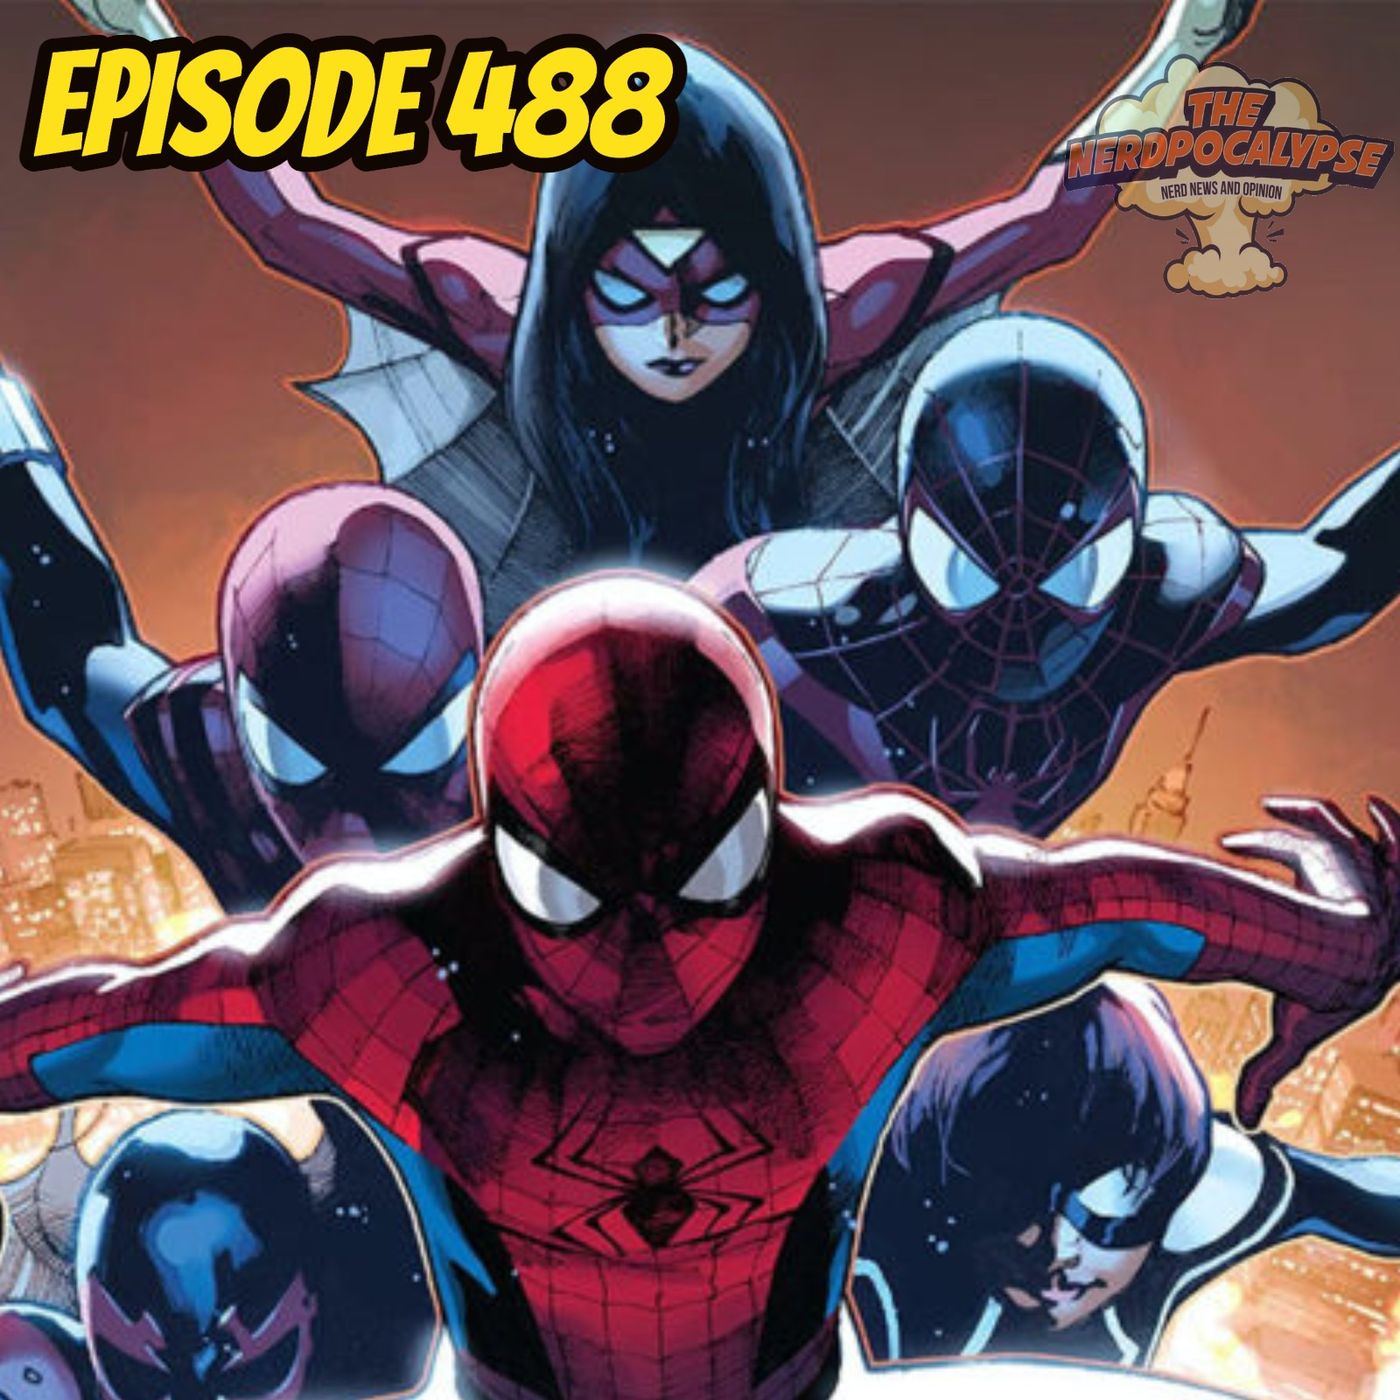 Episode 488: More Spiders Please!